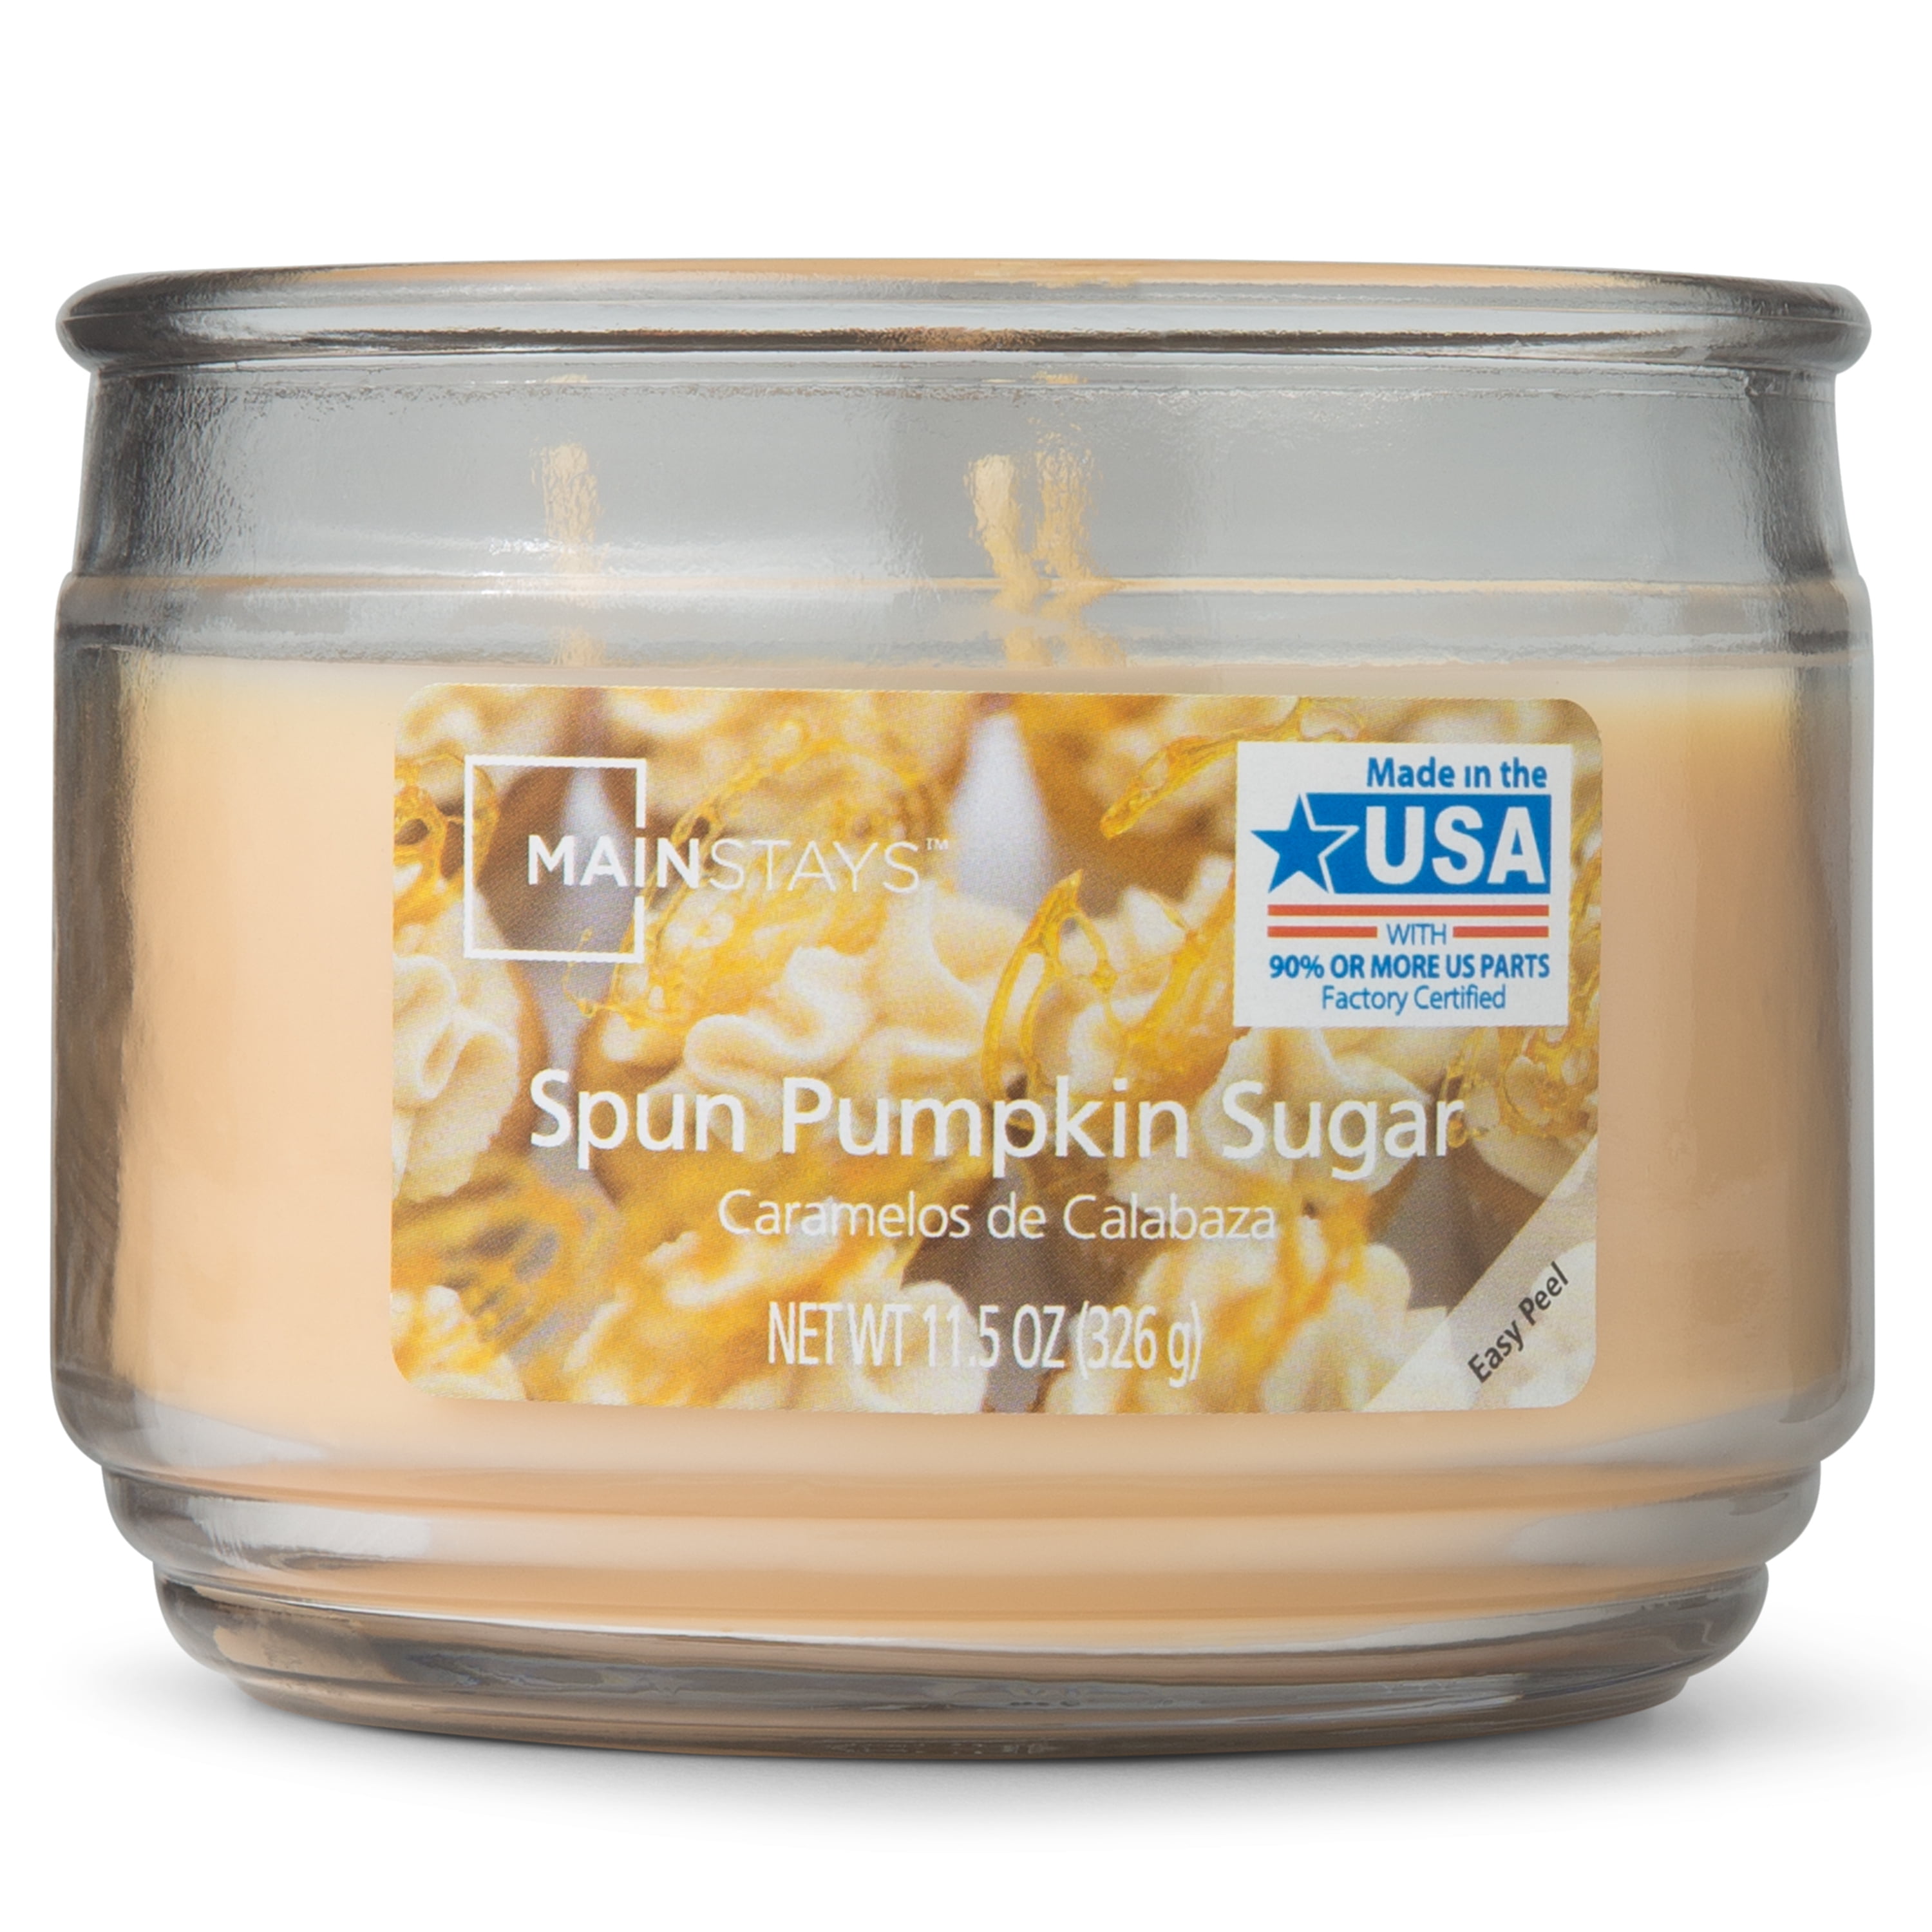 BATH & BODY WORKS PINEAPPLE PALM GRASS SCENTED CANDLE 3 WICK 13.5OZ LARGE YELLOW